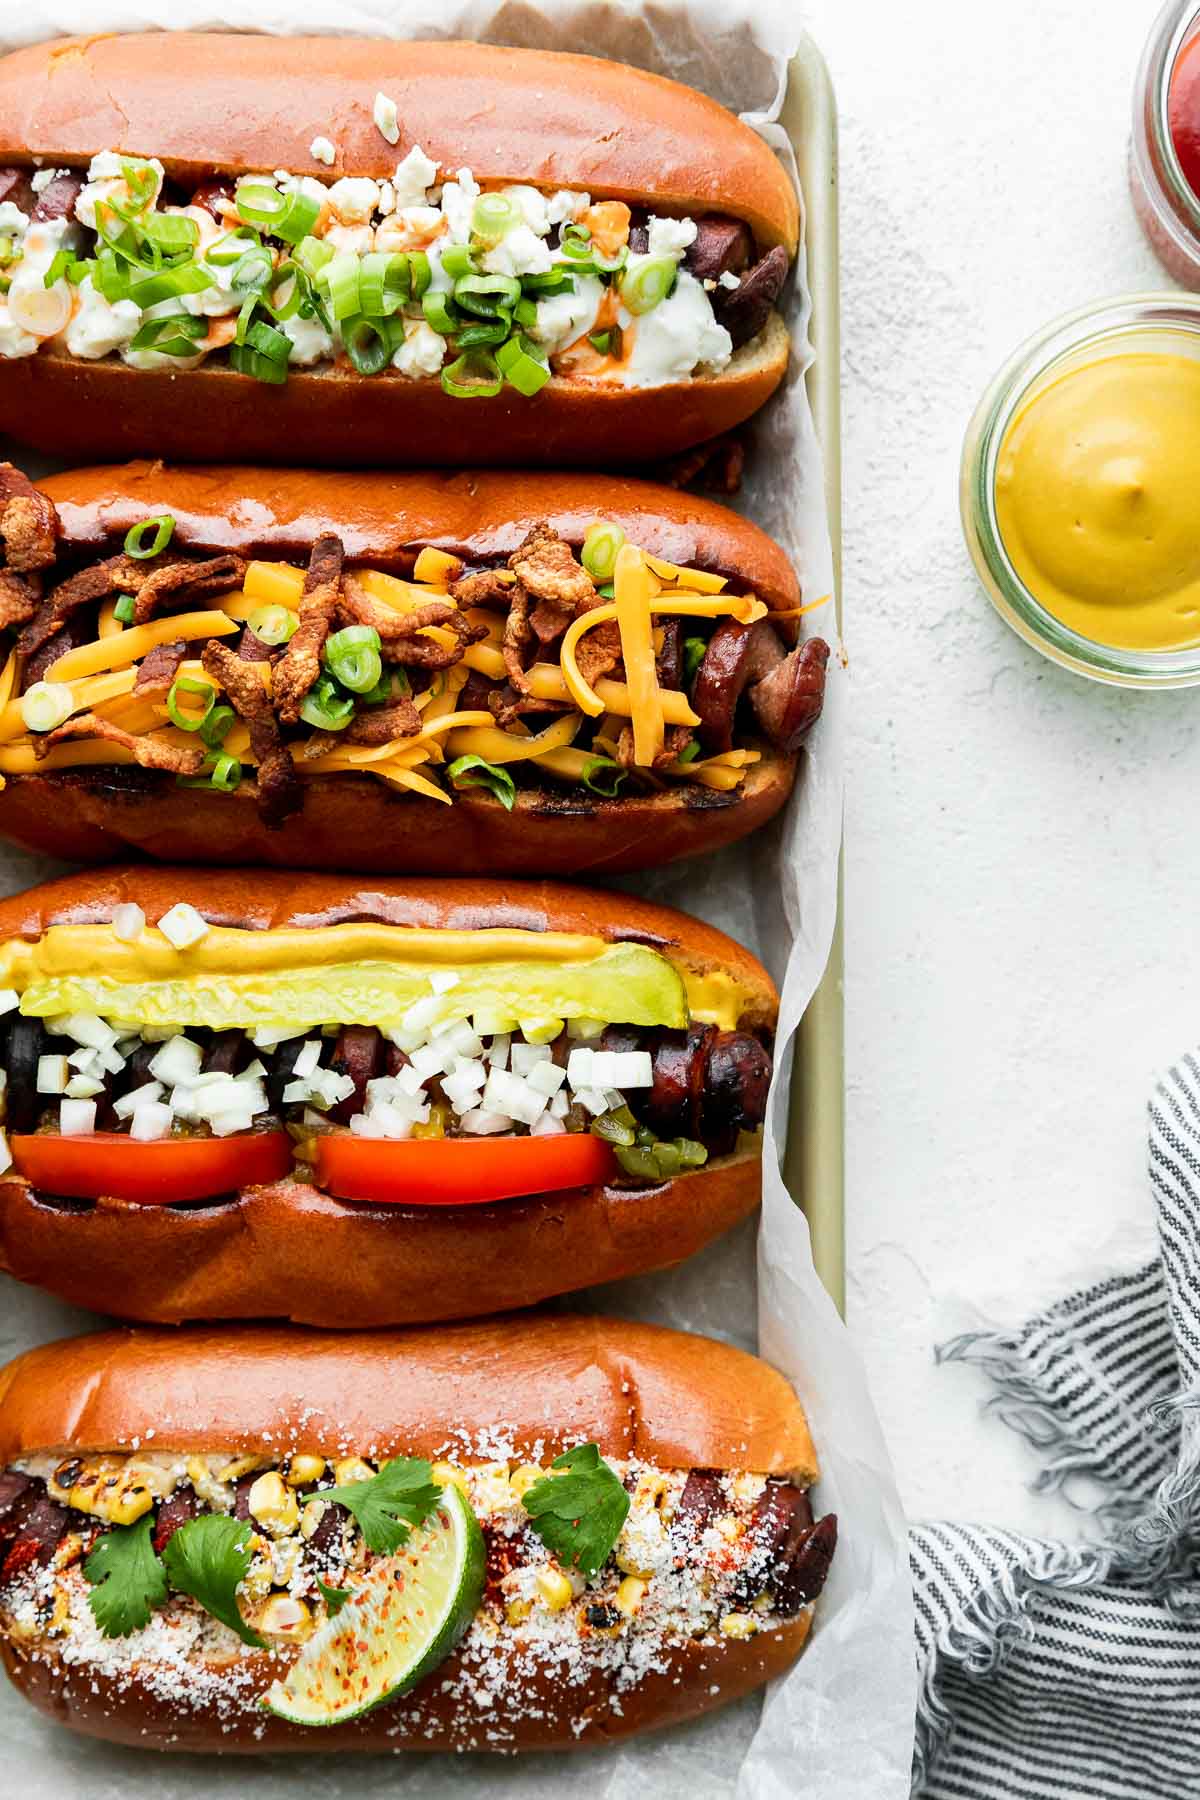 https://playswellwithbutter.com/wp-content/uploads/2022/05/Grilled-Hot-Dogs-How-to-Grill-Hot-Dogs-35.jpg